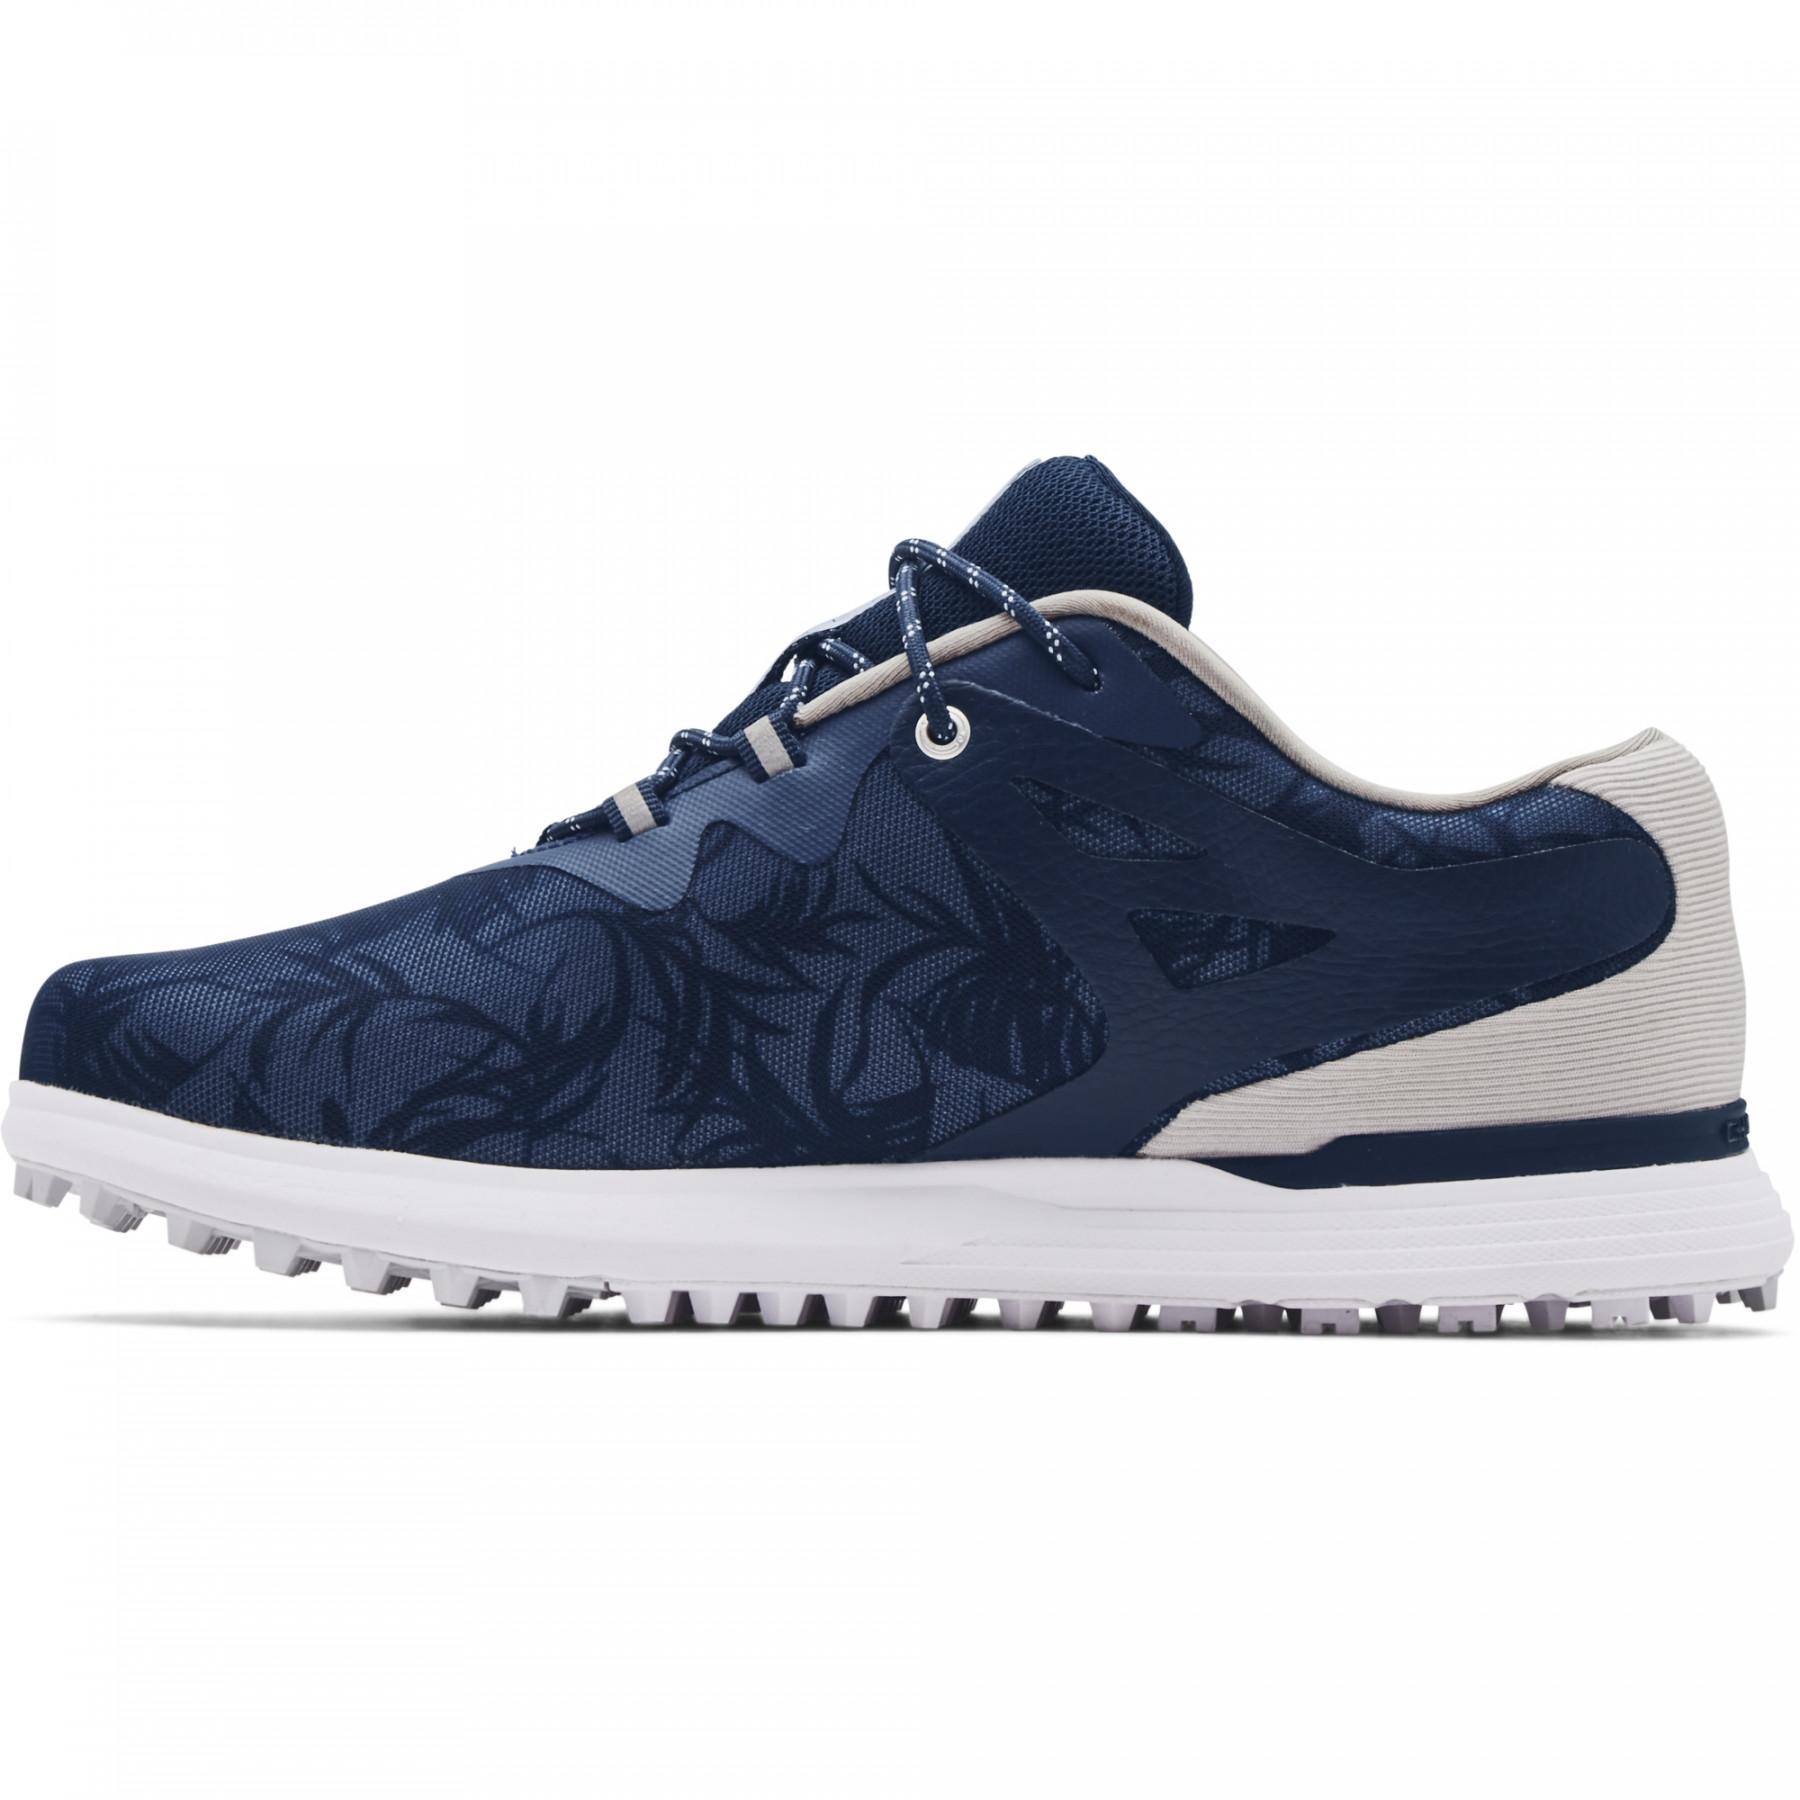 Chaussures femme Under Armour Charged Breathe SL TE